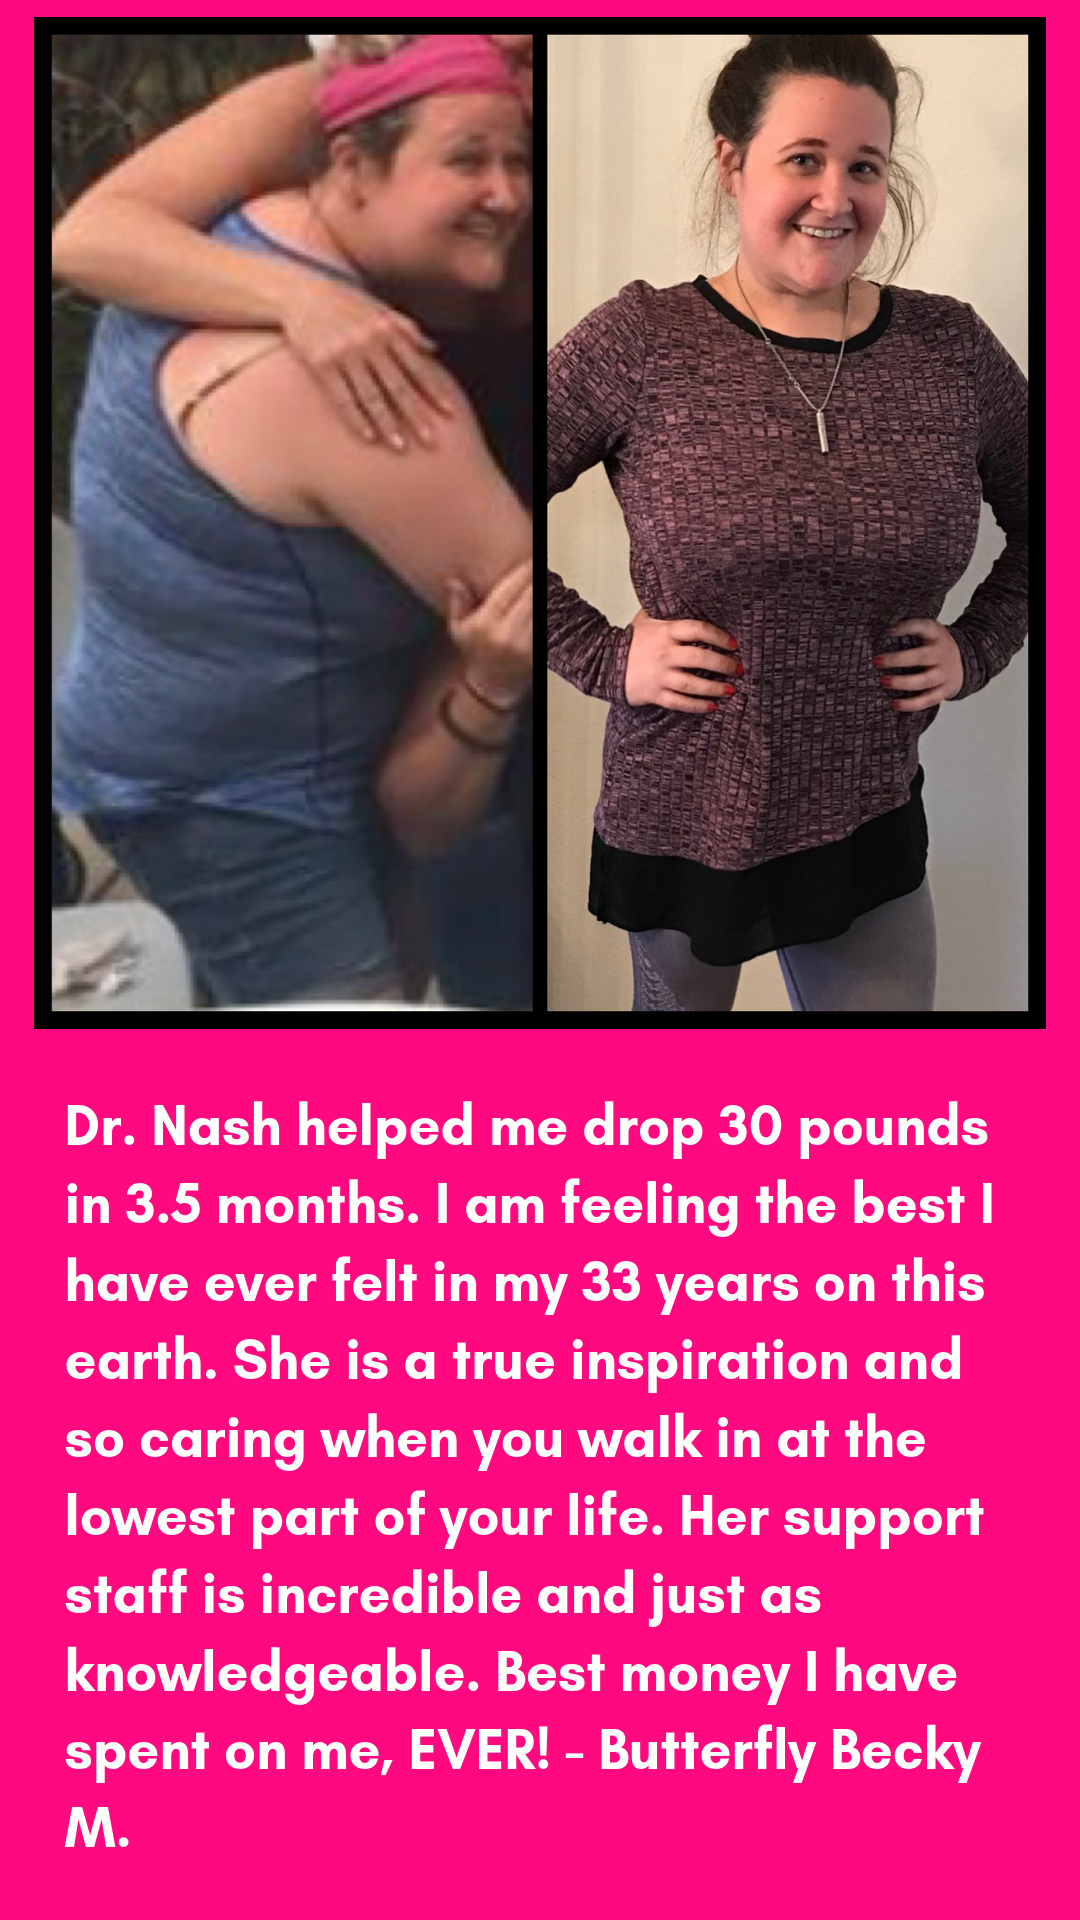 drnash.com before and after weight loss photo